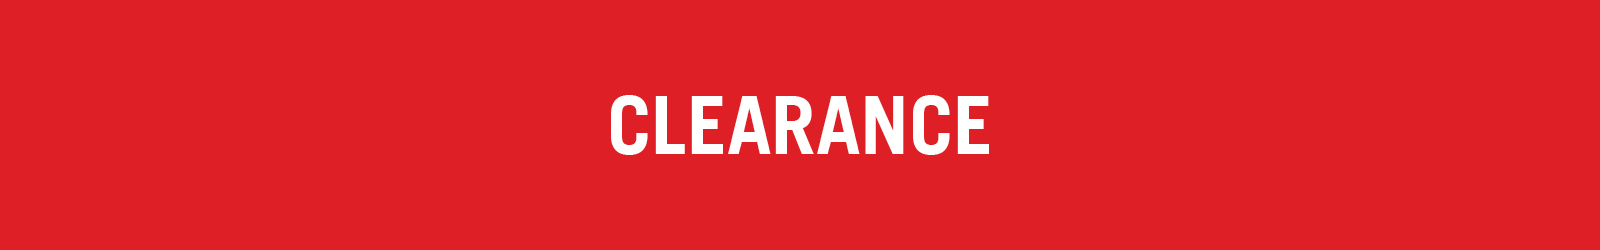 Clearance - Reference Books